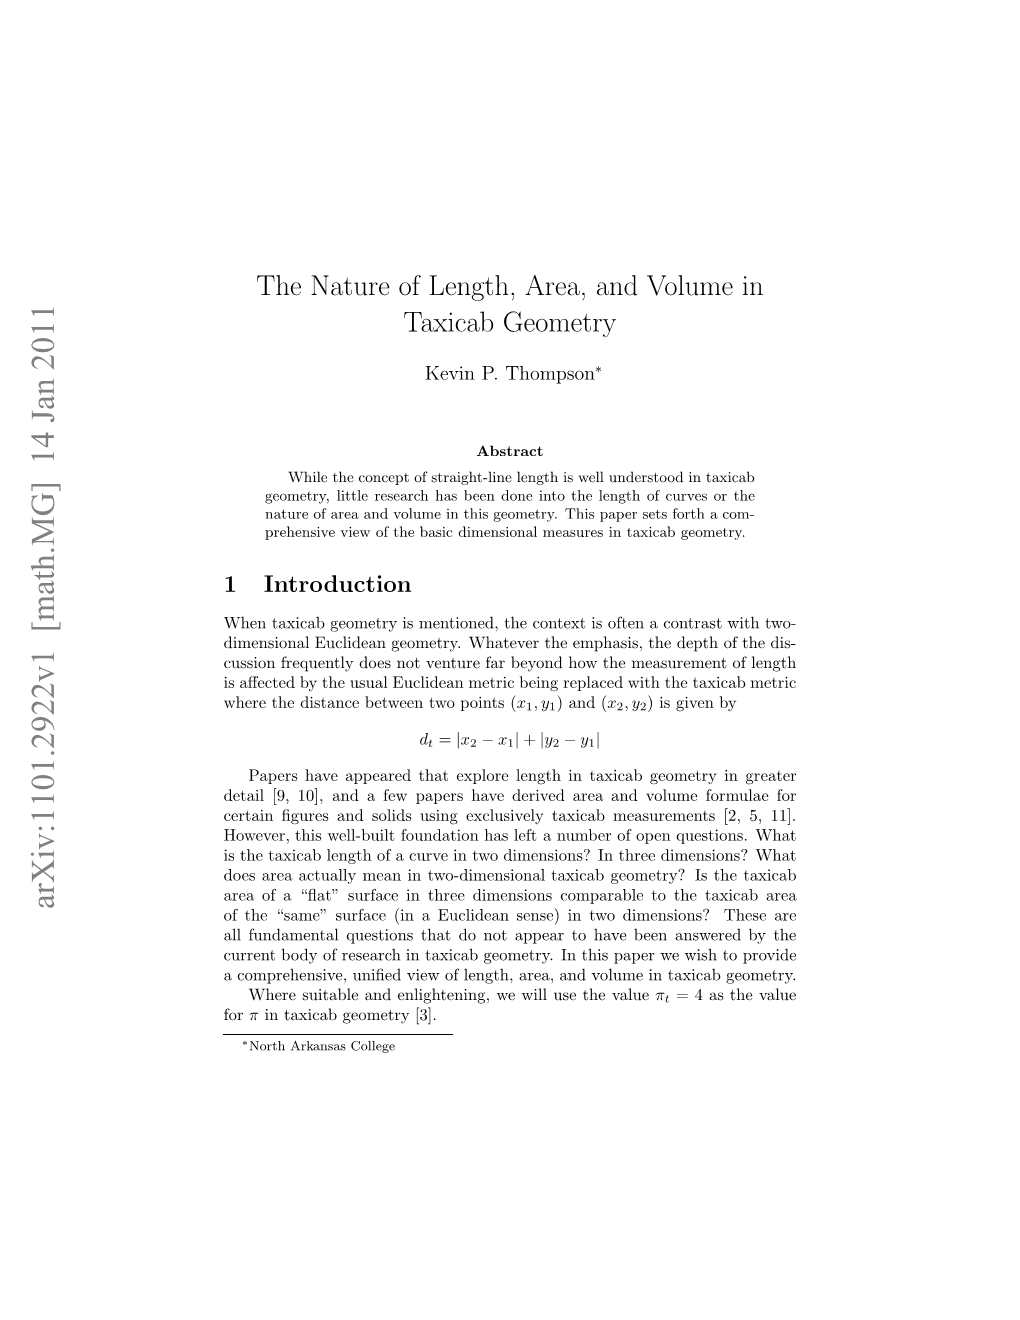 The Nature of Length, Area, and Volume in Taxicab Geometry